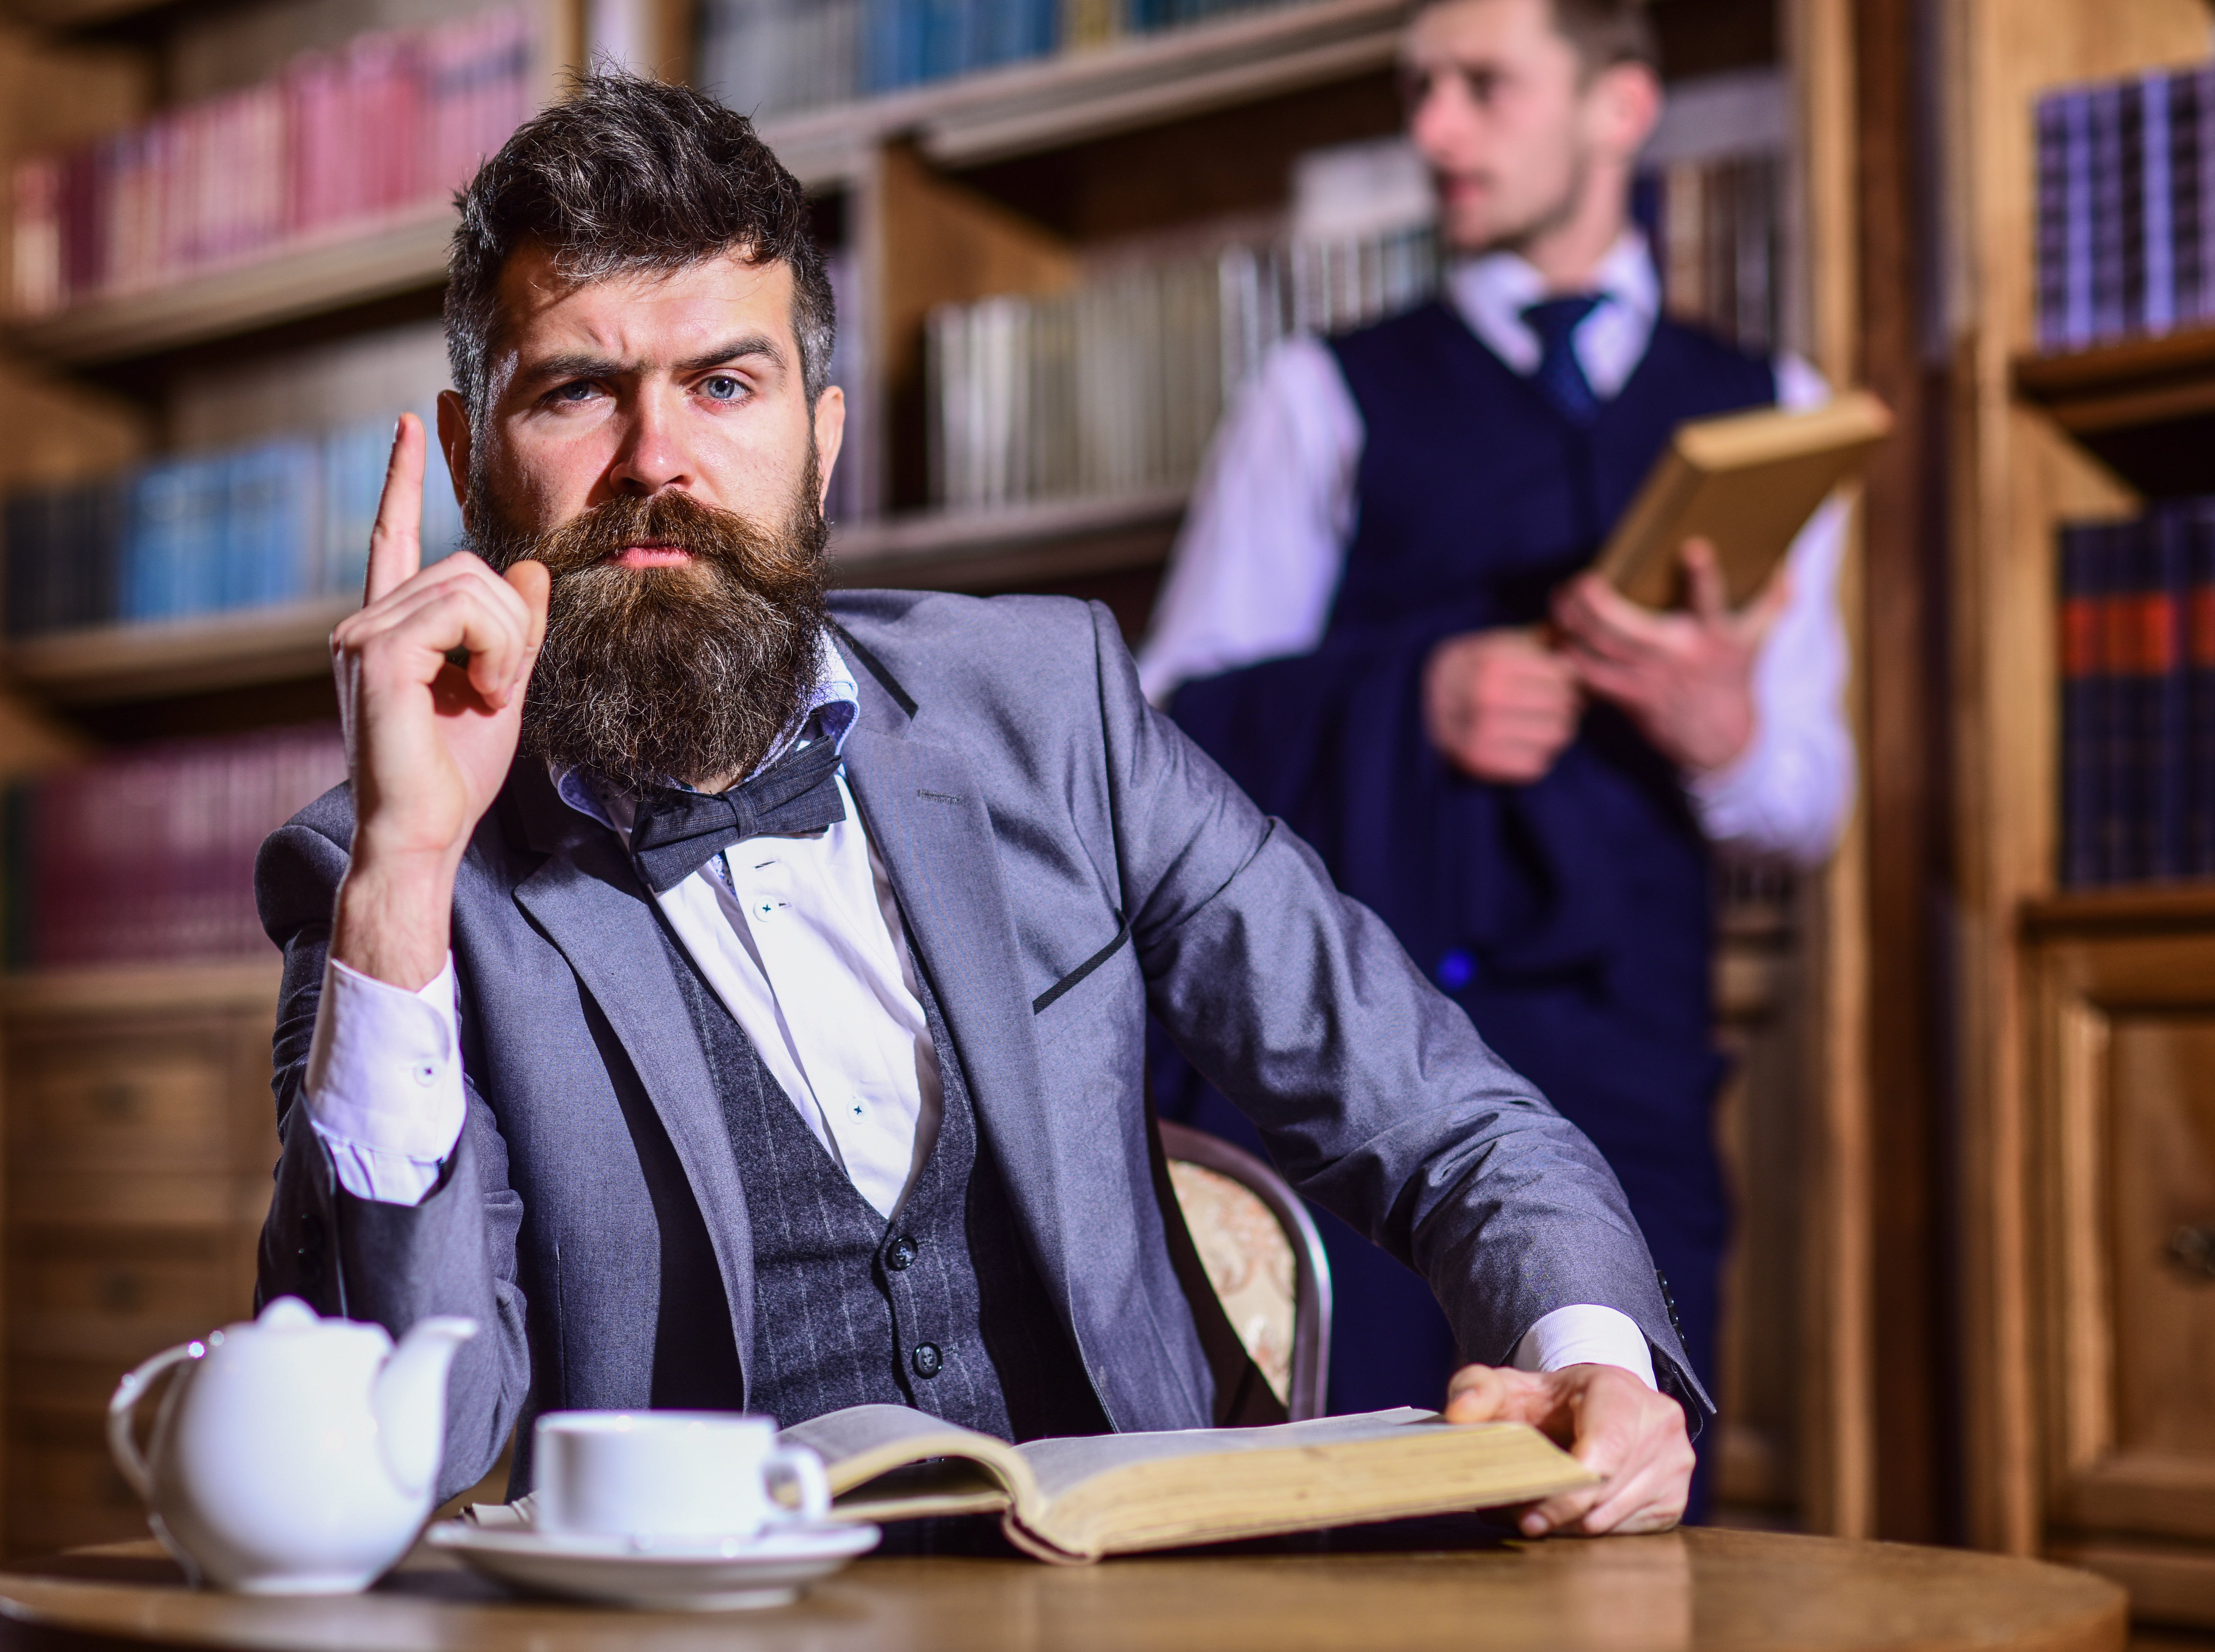 A man in a suit points one finger up as if he's figured a riddle while reading a book at the library | Source: Shutterstock